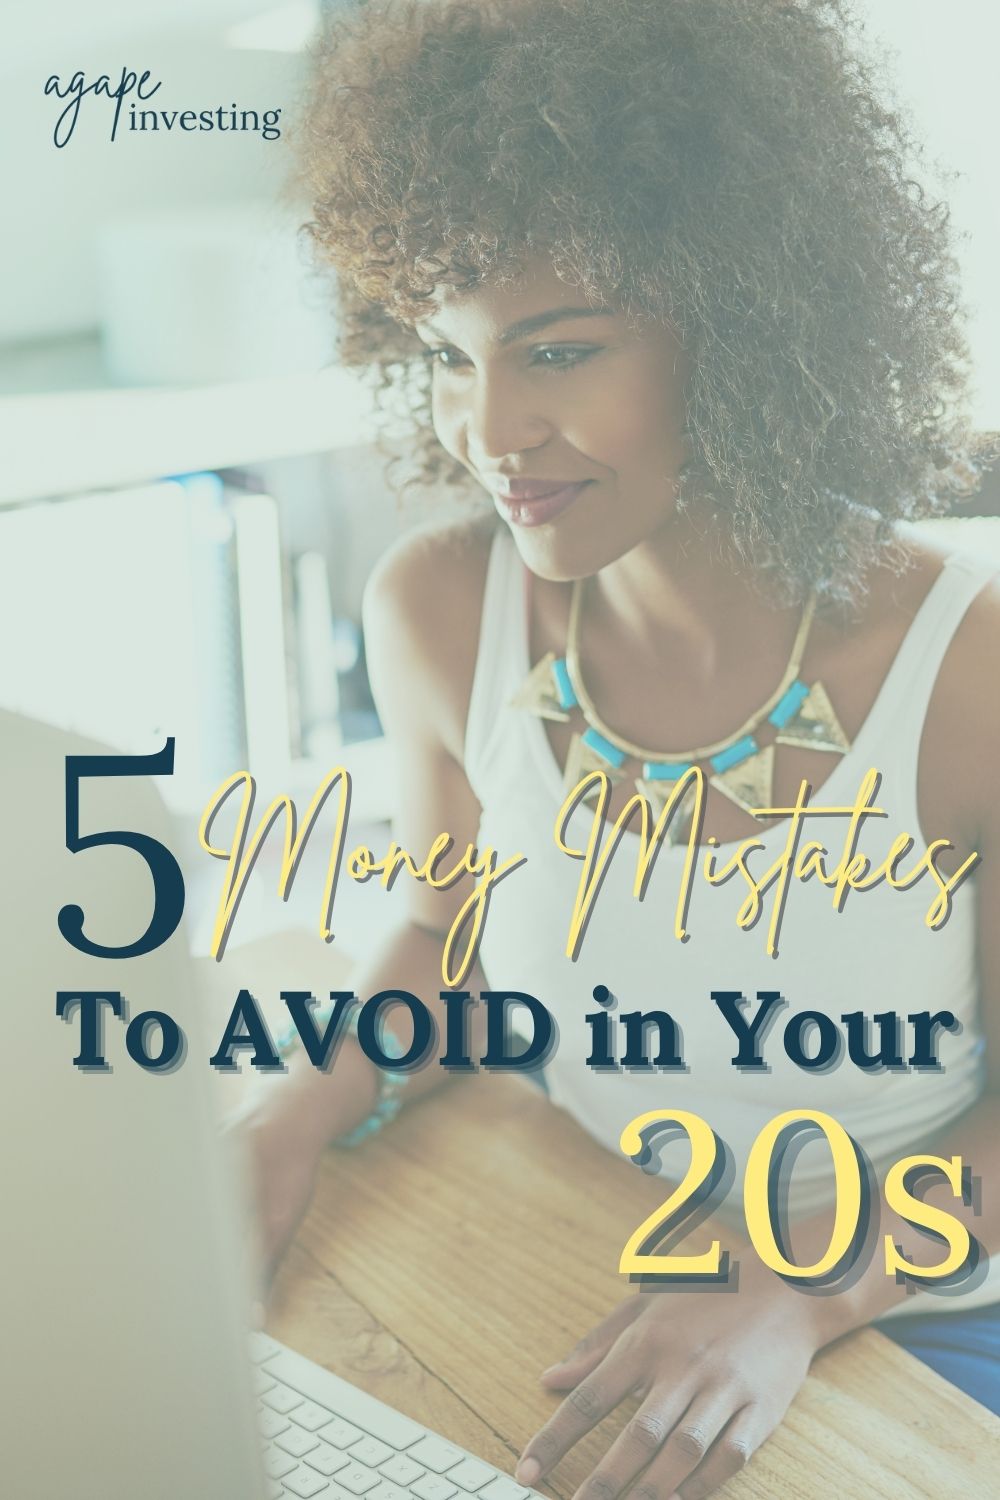 Many young professionals believe that in order to achieve financial freedom one day all they need is a really high paying job and then they’ll be set. But that isn't typically the case! Let's explore 5 money mistakes to avoid in your 20s so you can set yourself up for success further down the road. #moneytipsforyoungprofessionals #moneytipsforstudents